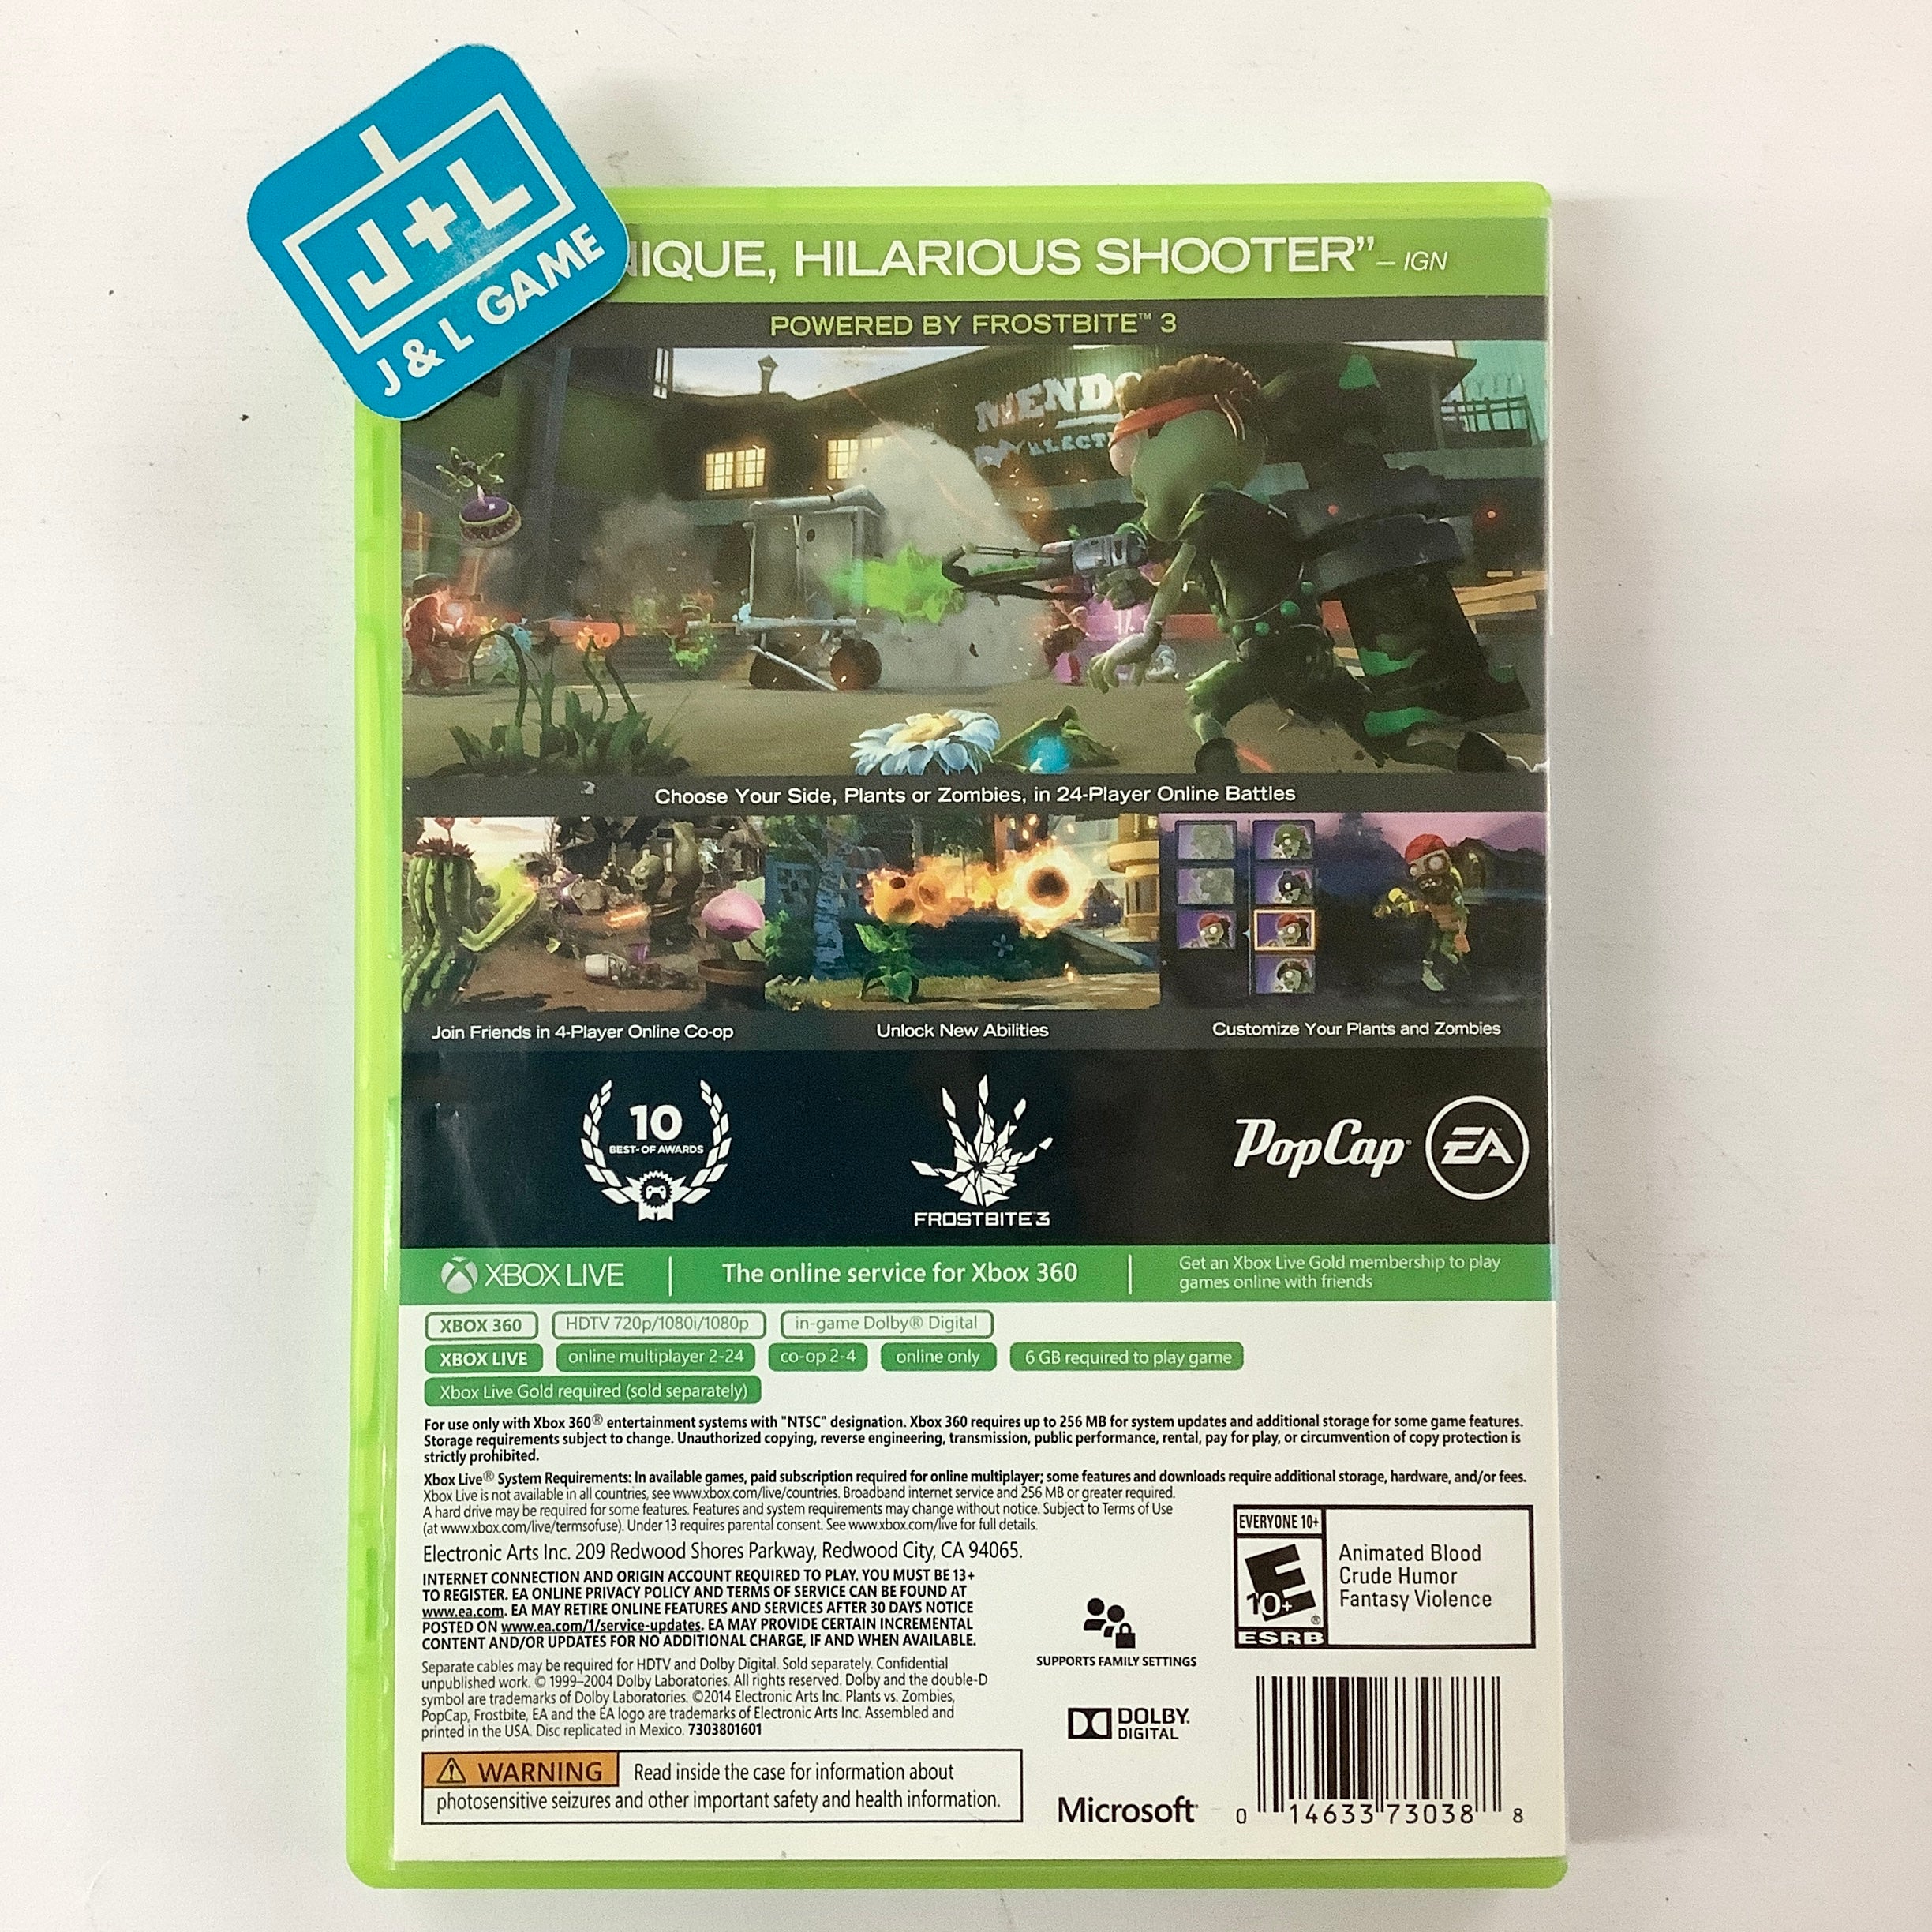 Plants vs Zombies: Garden Warfare - Xbox 360 [Pre-Owned] Video Games Electronic Arts   